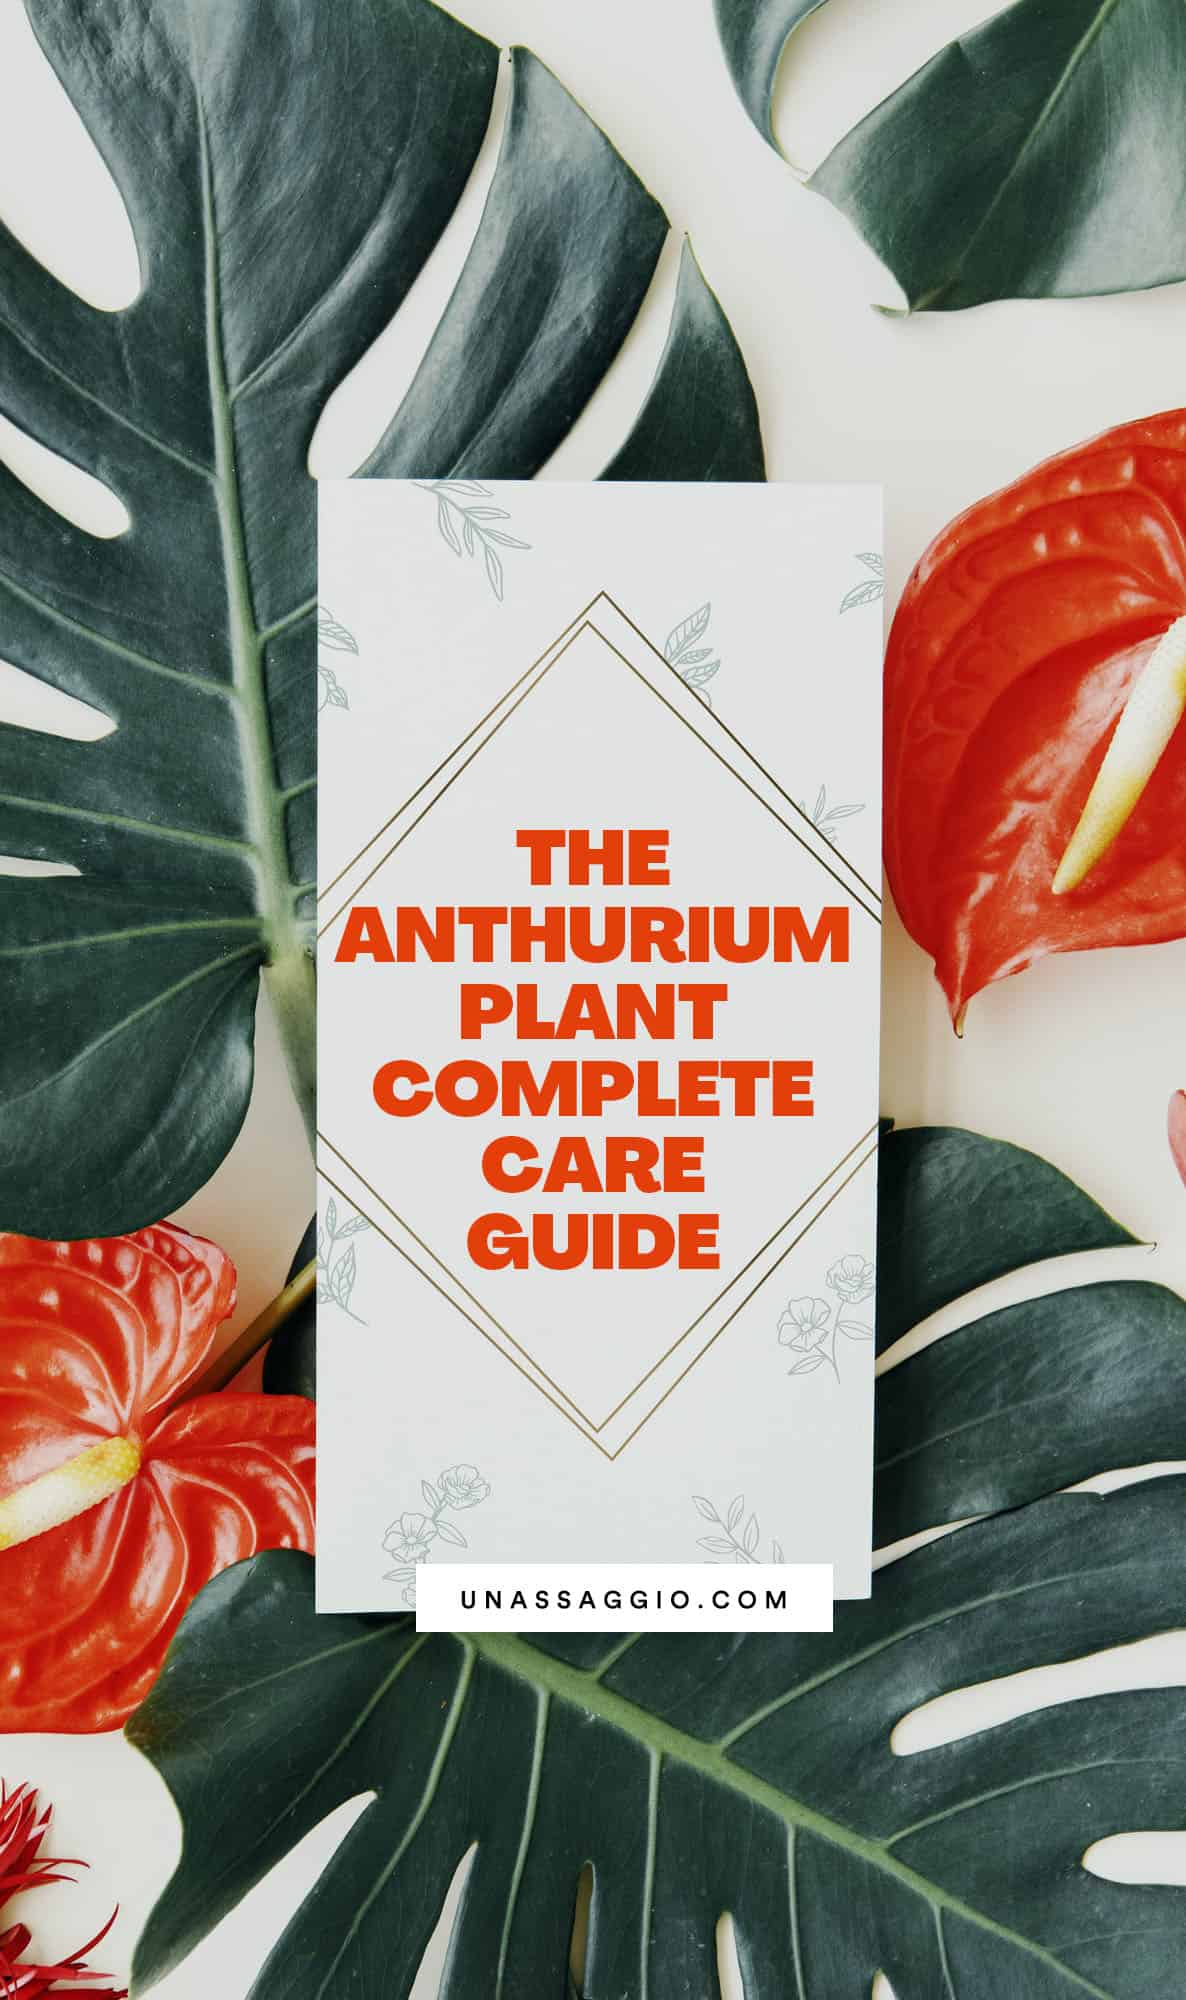 Anthurium care and propagation guide